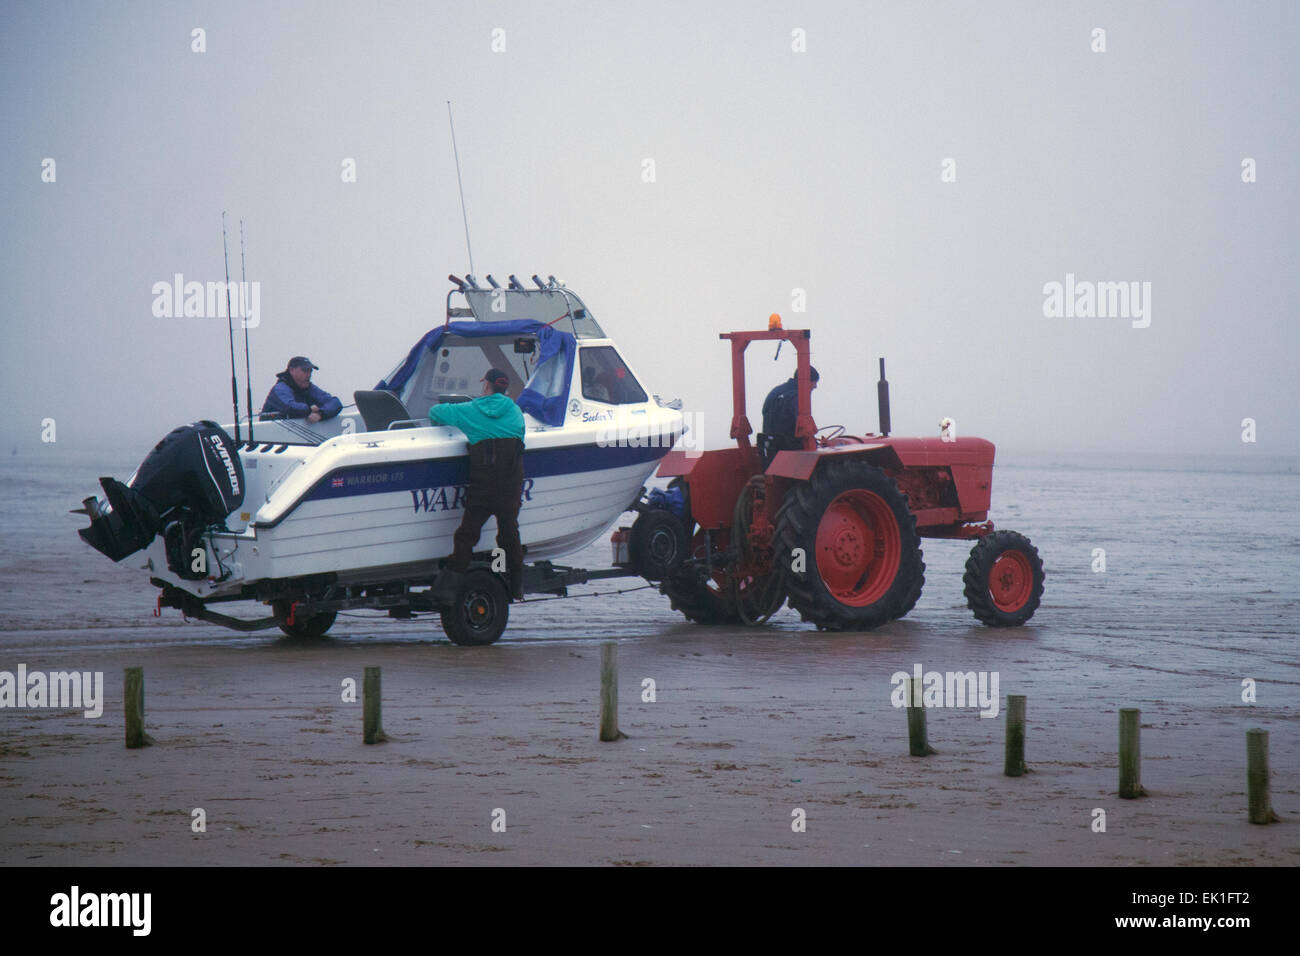 Ainsdale, Southport, Sefton, Merseyside, UK. 5th April, 2015. UK Weather:  Foggy, Misty and Damp on the West Coast as rod and line Sea Fisherman take advantage of the calm conditions to launch their boats, with a David Brown tractor,  and fish the incoming tide.  Credit:  Mar Photographics/Alamy Live News Stock Photo